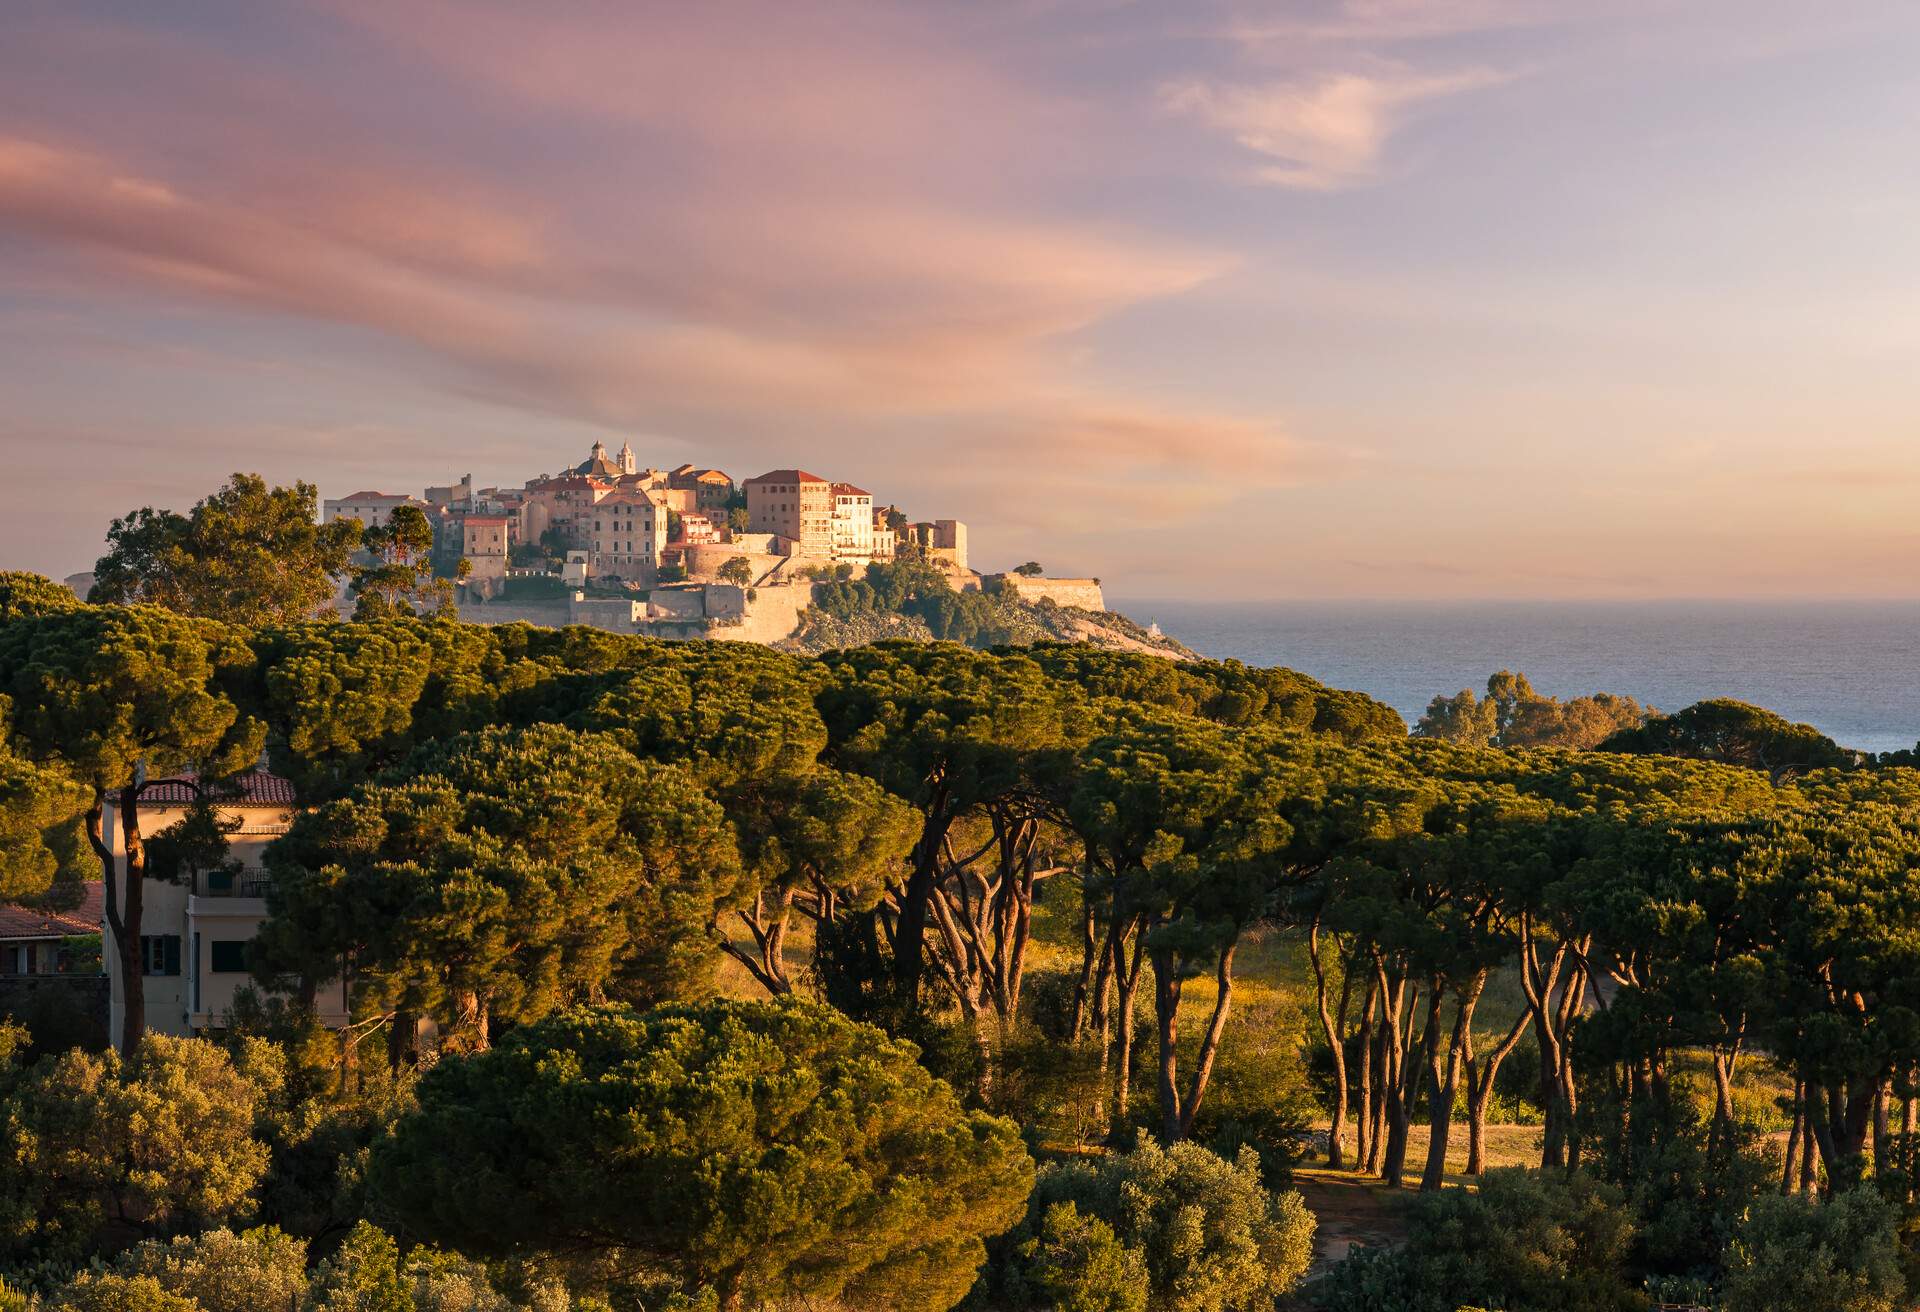 Early morning sun on the citadel of Calvi in the Balagne region of Corsica with pine trees in the foreground and the Mediterranean sea in the distance